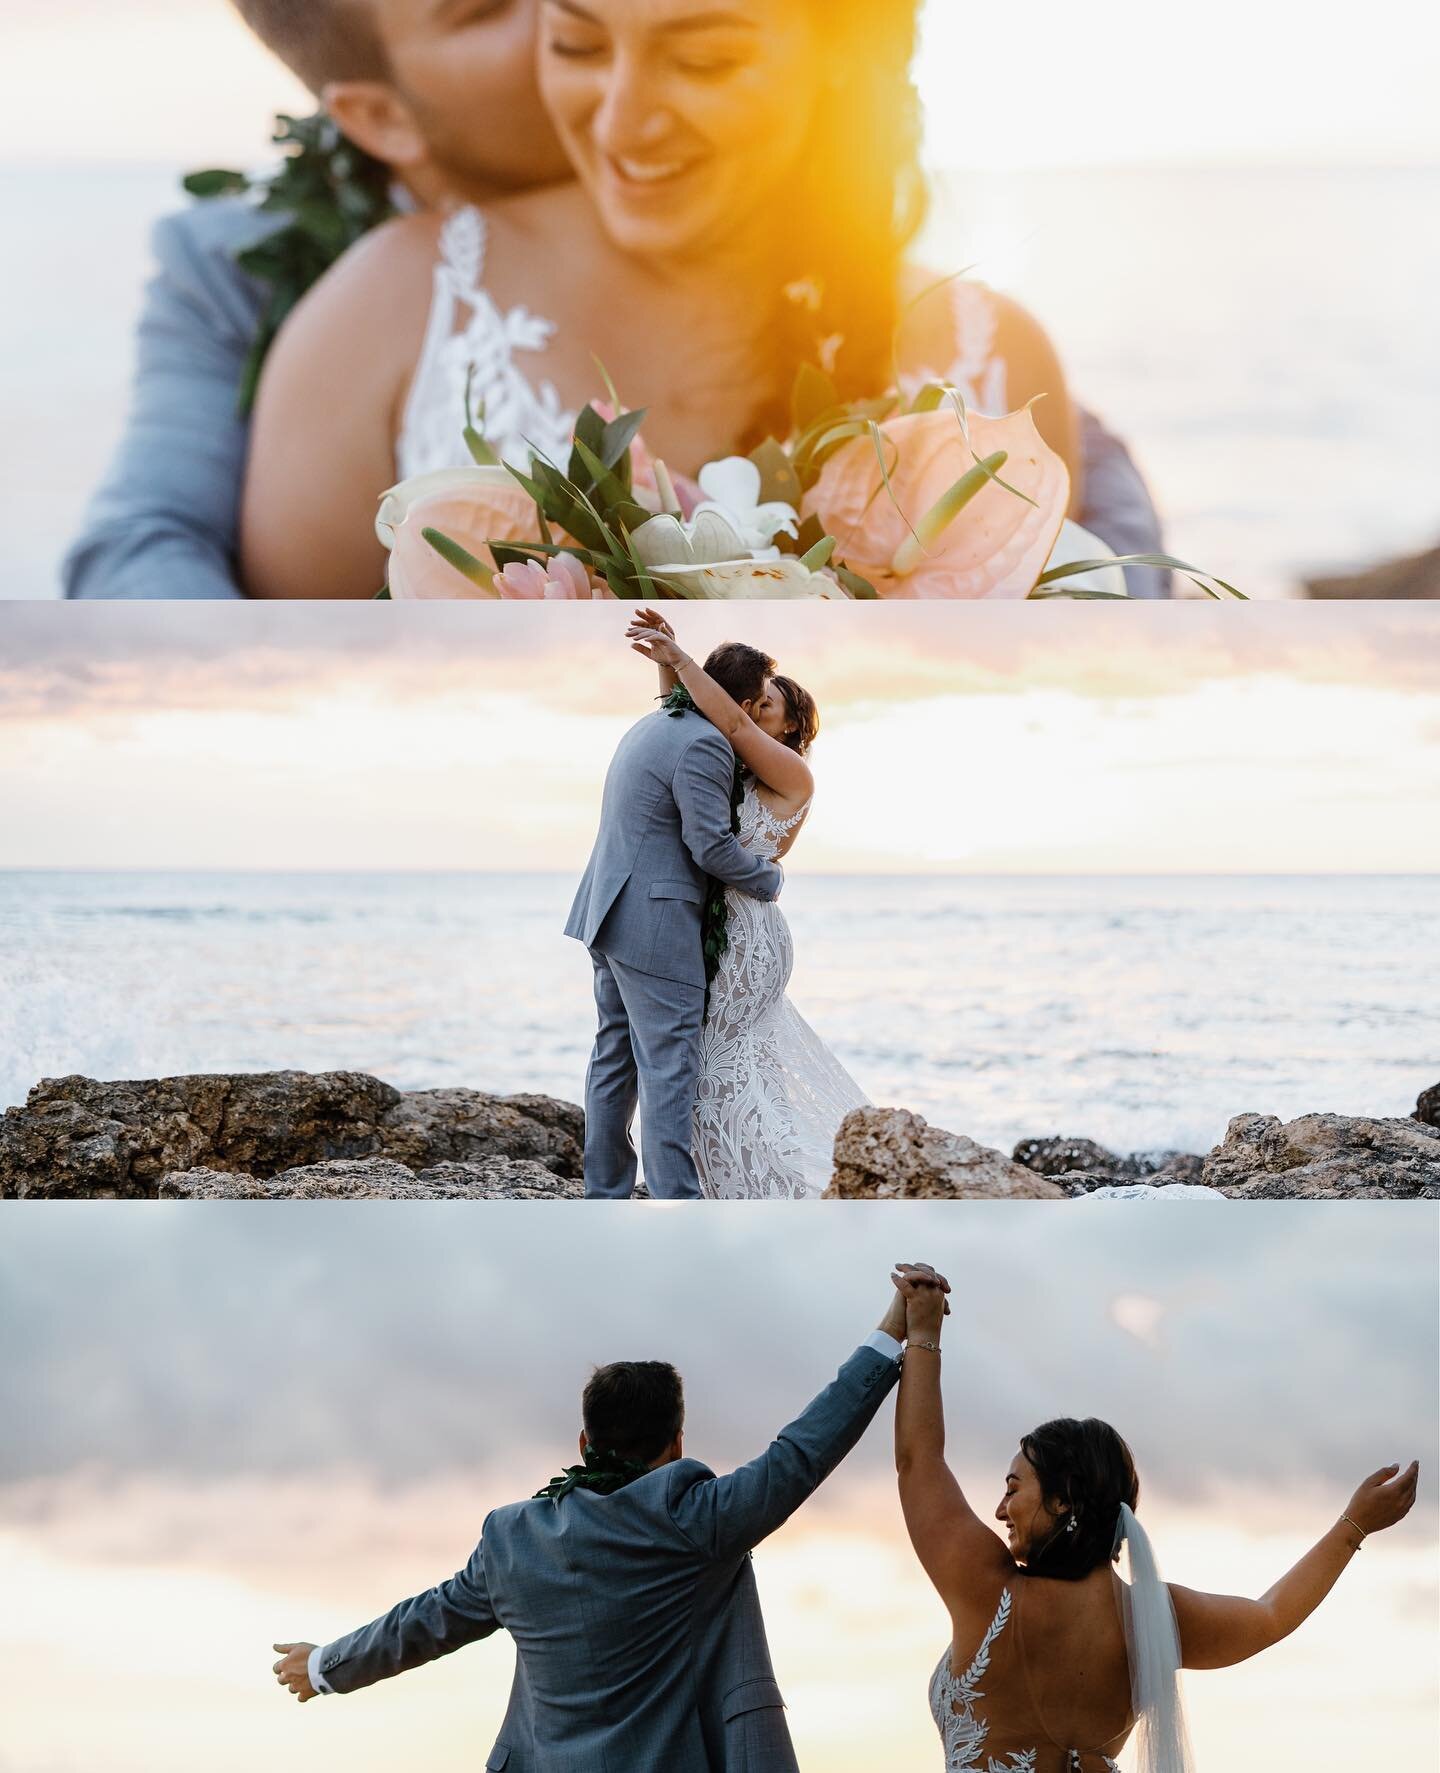 This day, this couple, this sunset. ☀️ No matter how beautiful your wedding is, if your photos only highlight &ldquo;perfect&rdquo; poses, then what will you remember 50 years from now when you look back? 

For some people, that&rsquo;s what they wan